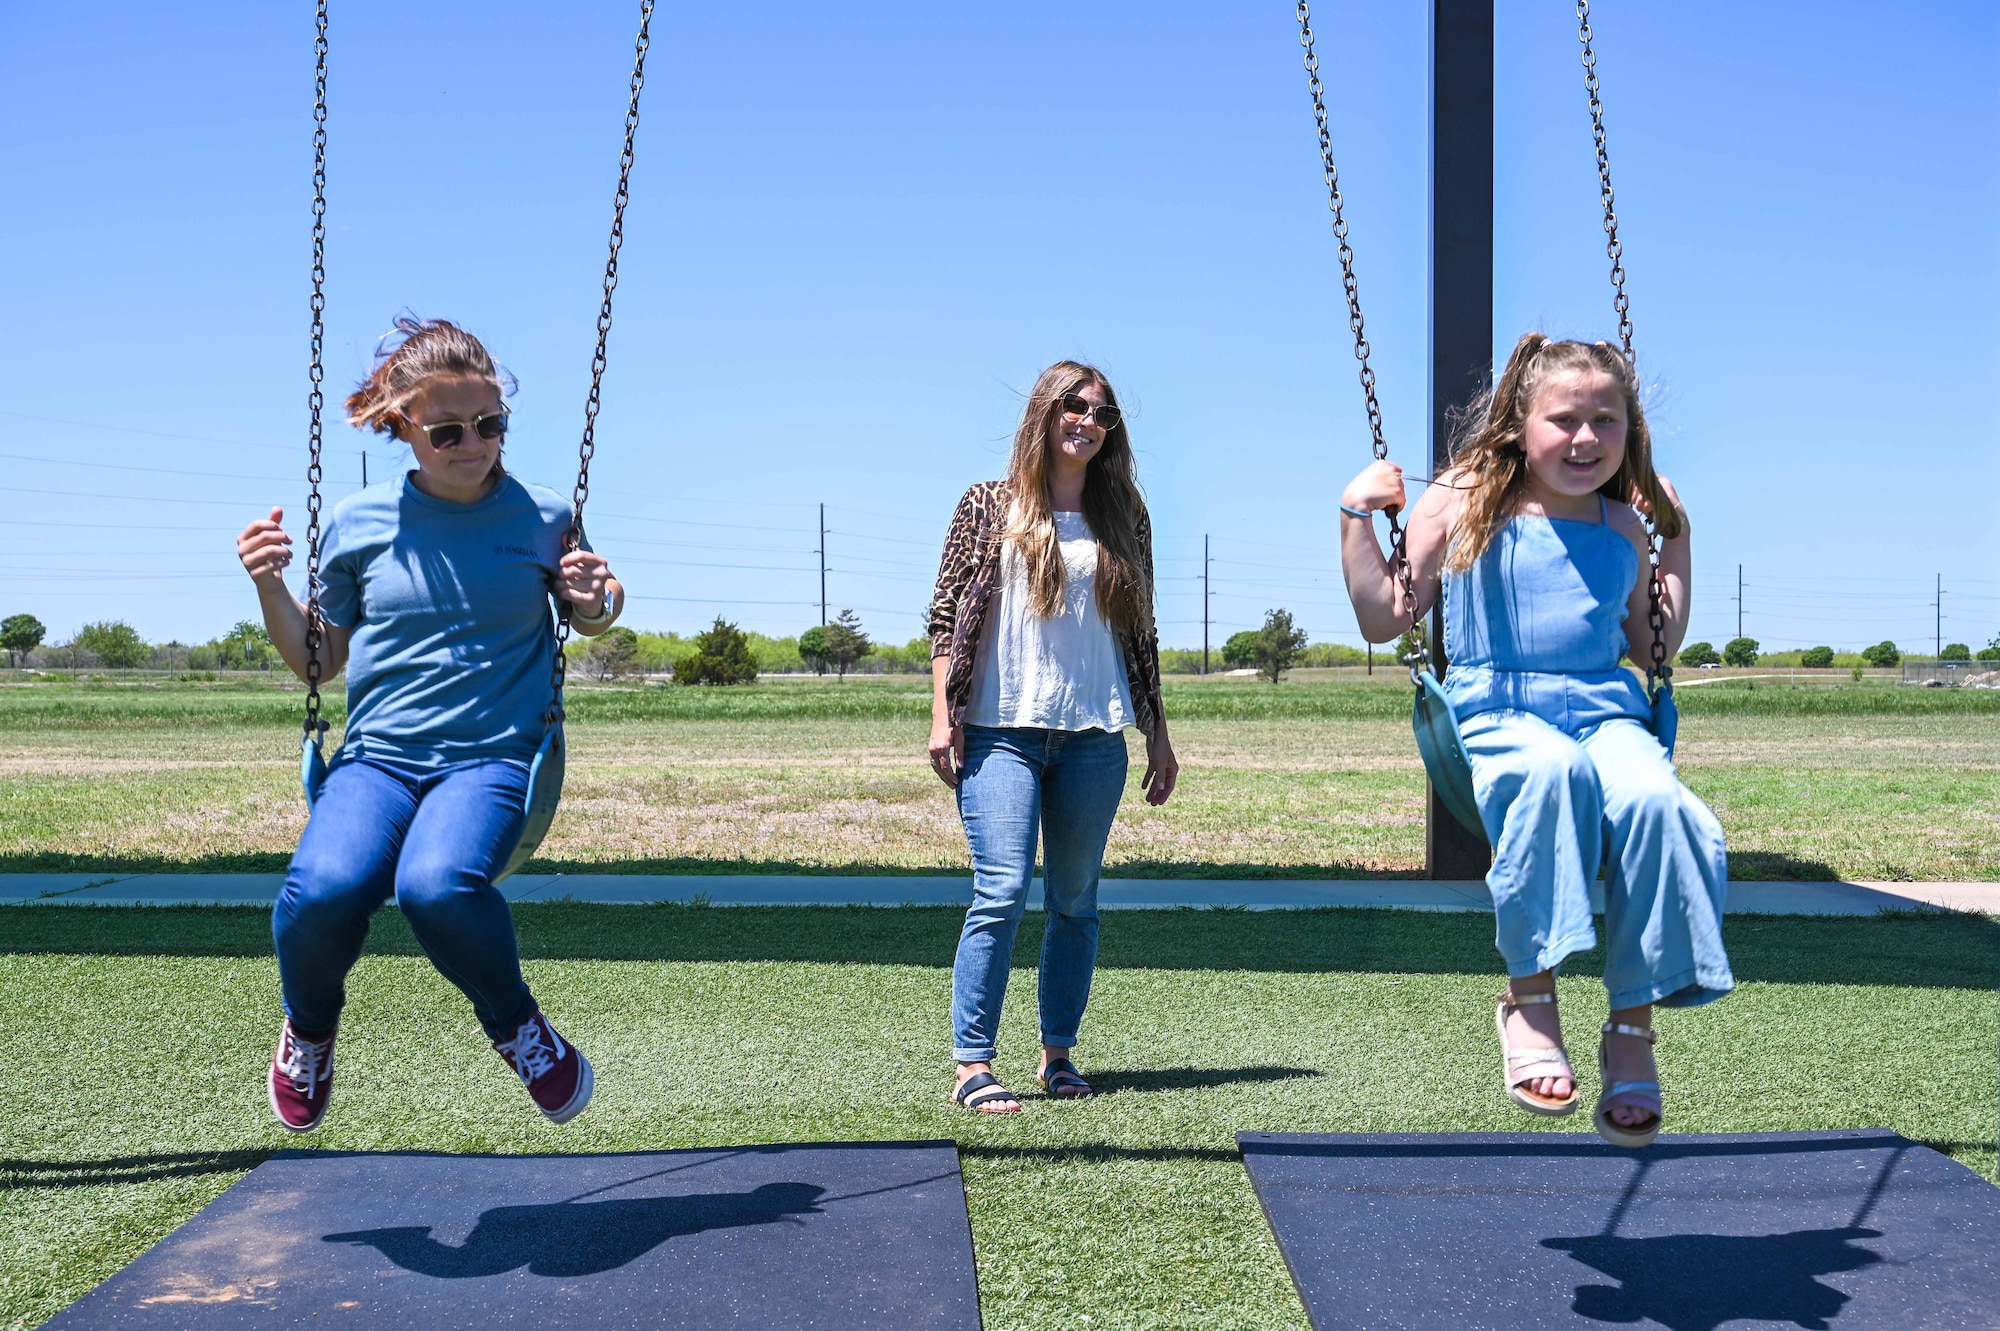 Trisha Fleishman, 97th Civil Engineering Squadron water quality program manager, pushes her daughters, Layla (left) and Margie (right), on a swing set at Altus Air Force Base, Oklahoma, May 4, 2023. Women make up 28.7% of the civilian workforce in the U.S. Air Force. (U.S. Air Force photo by Senior Airman Kayla Christenson)